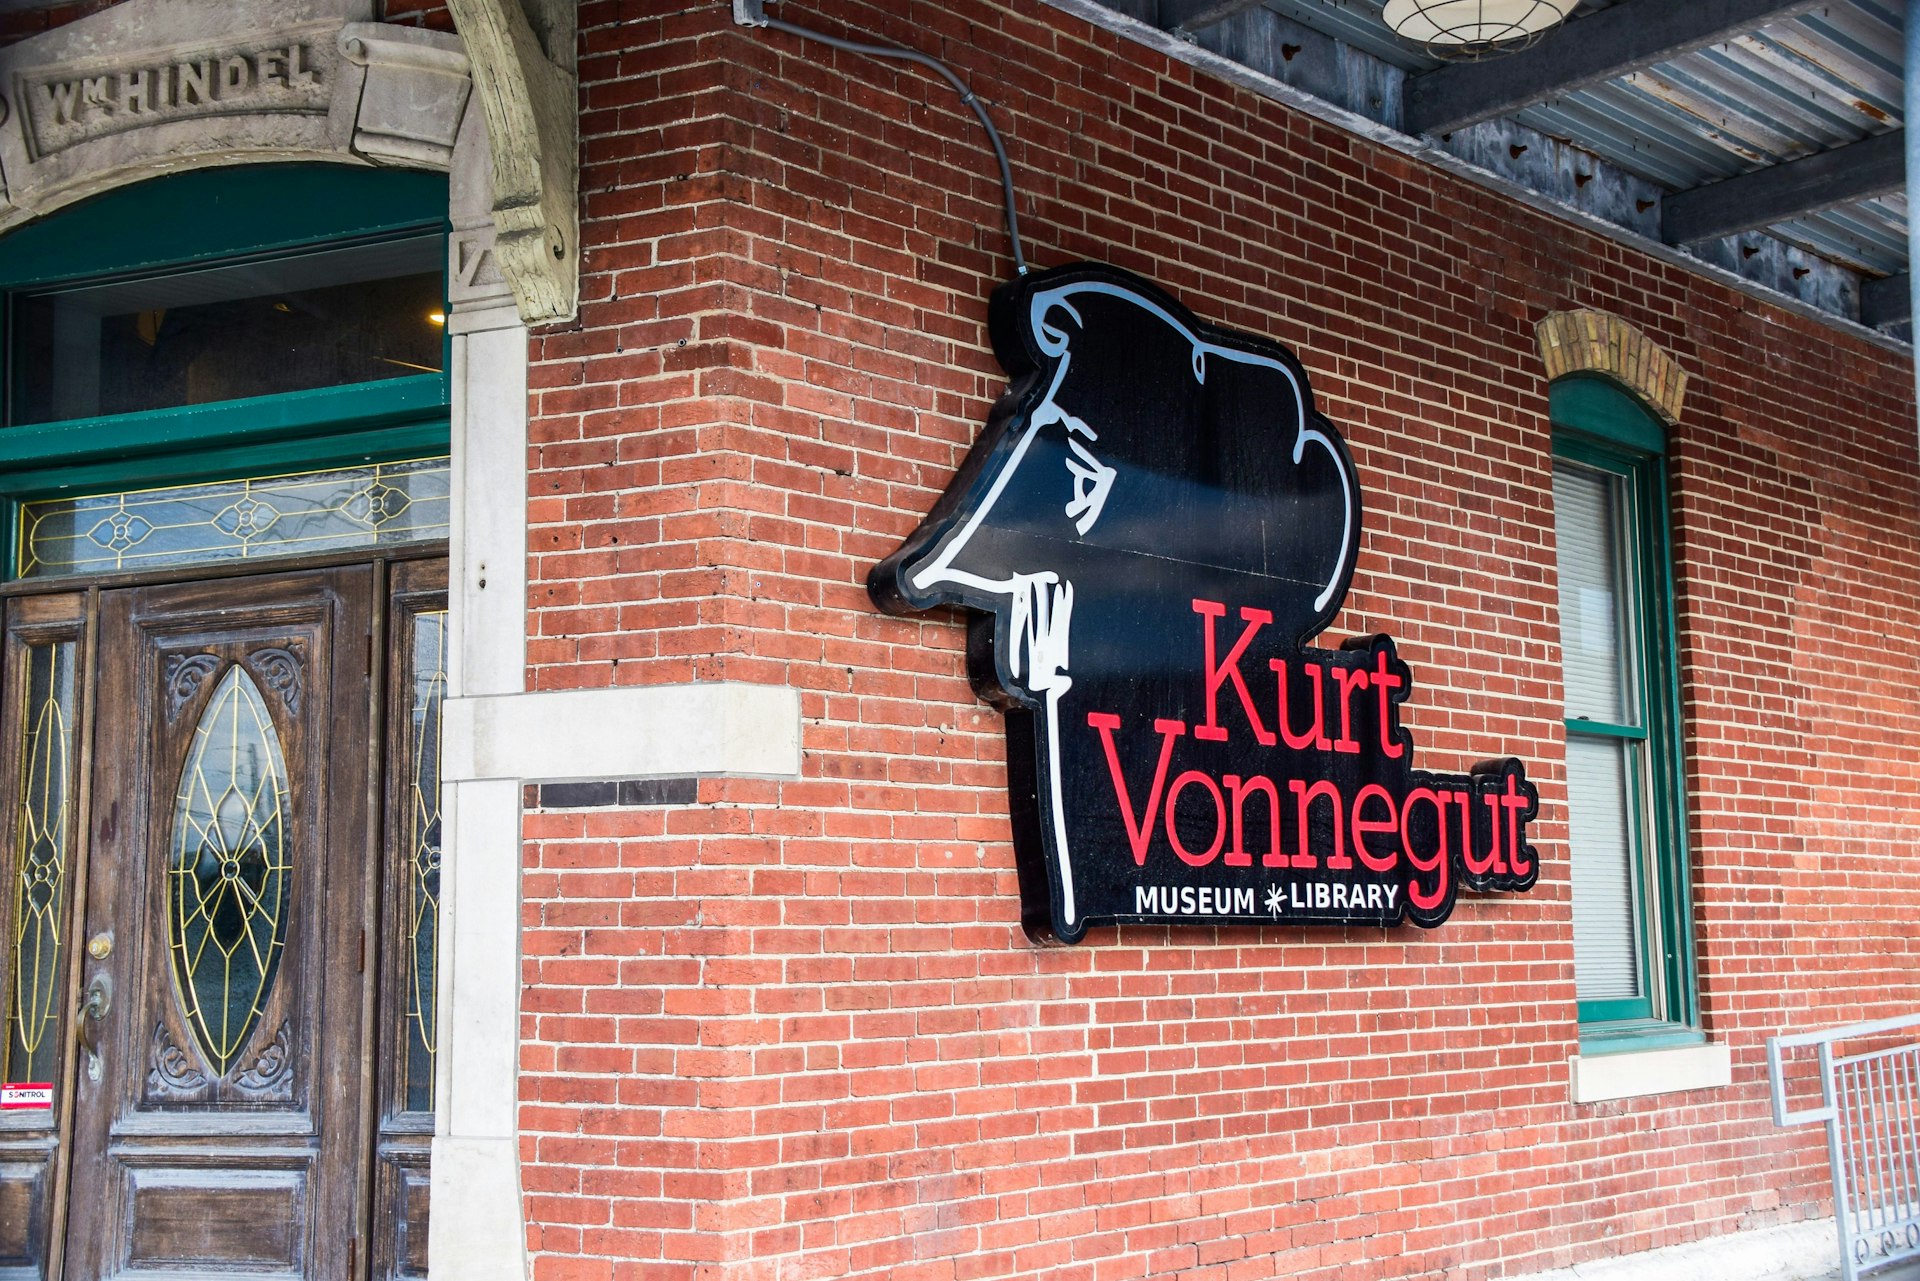 The sign for the Kurt Vonnegut Museum and Library